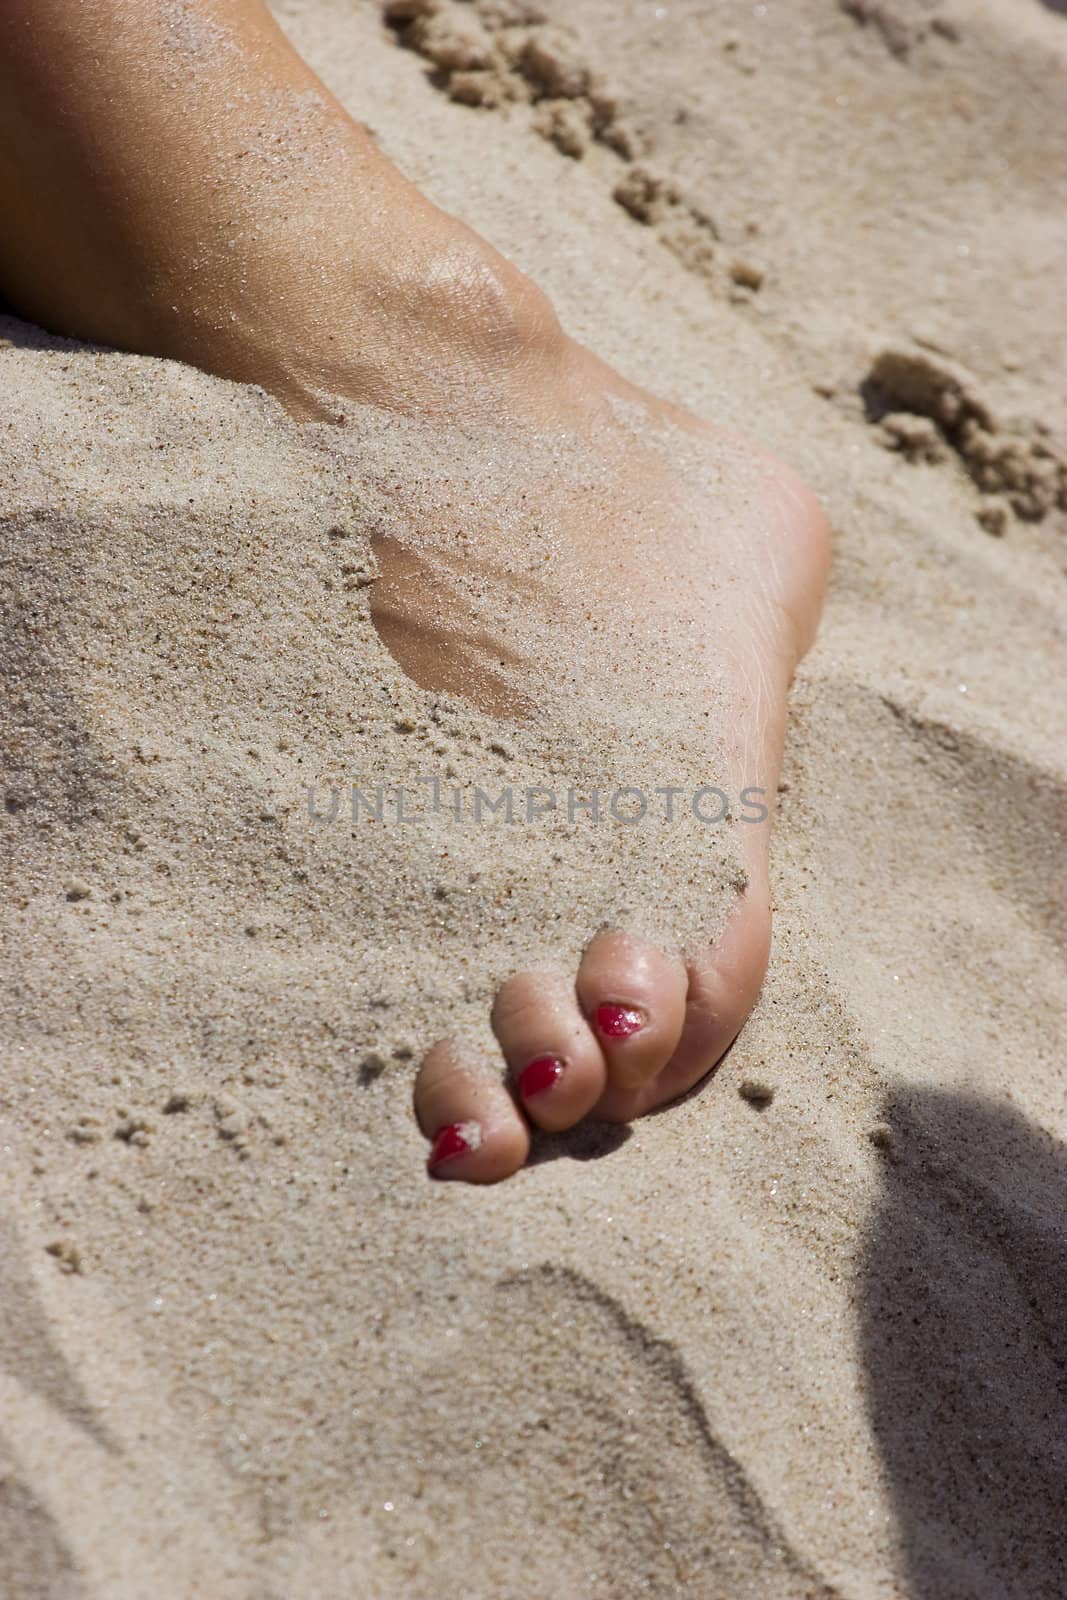 Leg of young woman in the sand on the beach.